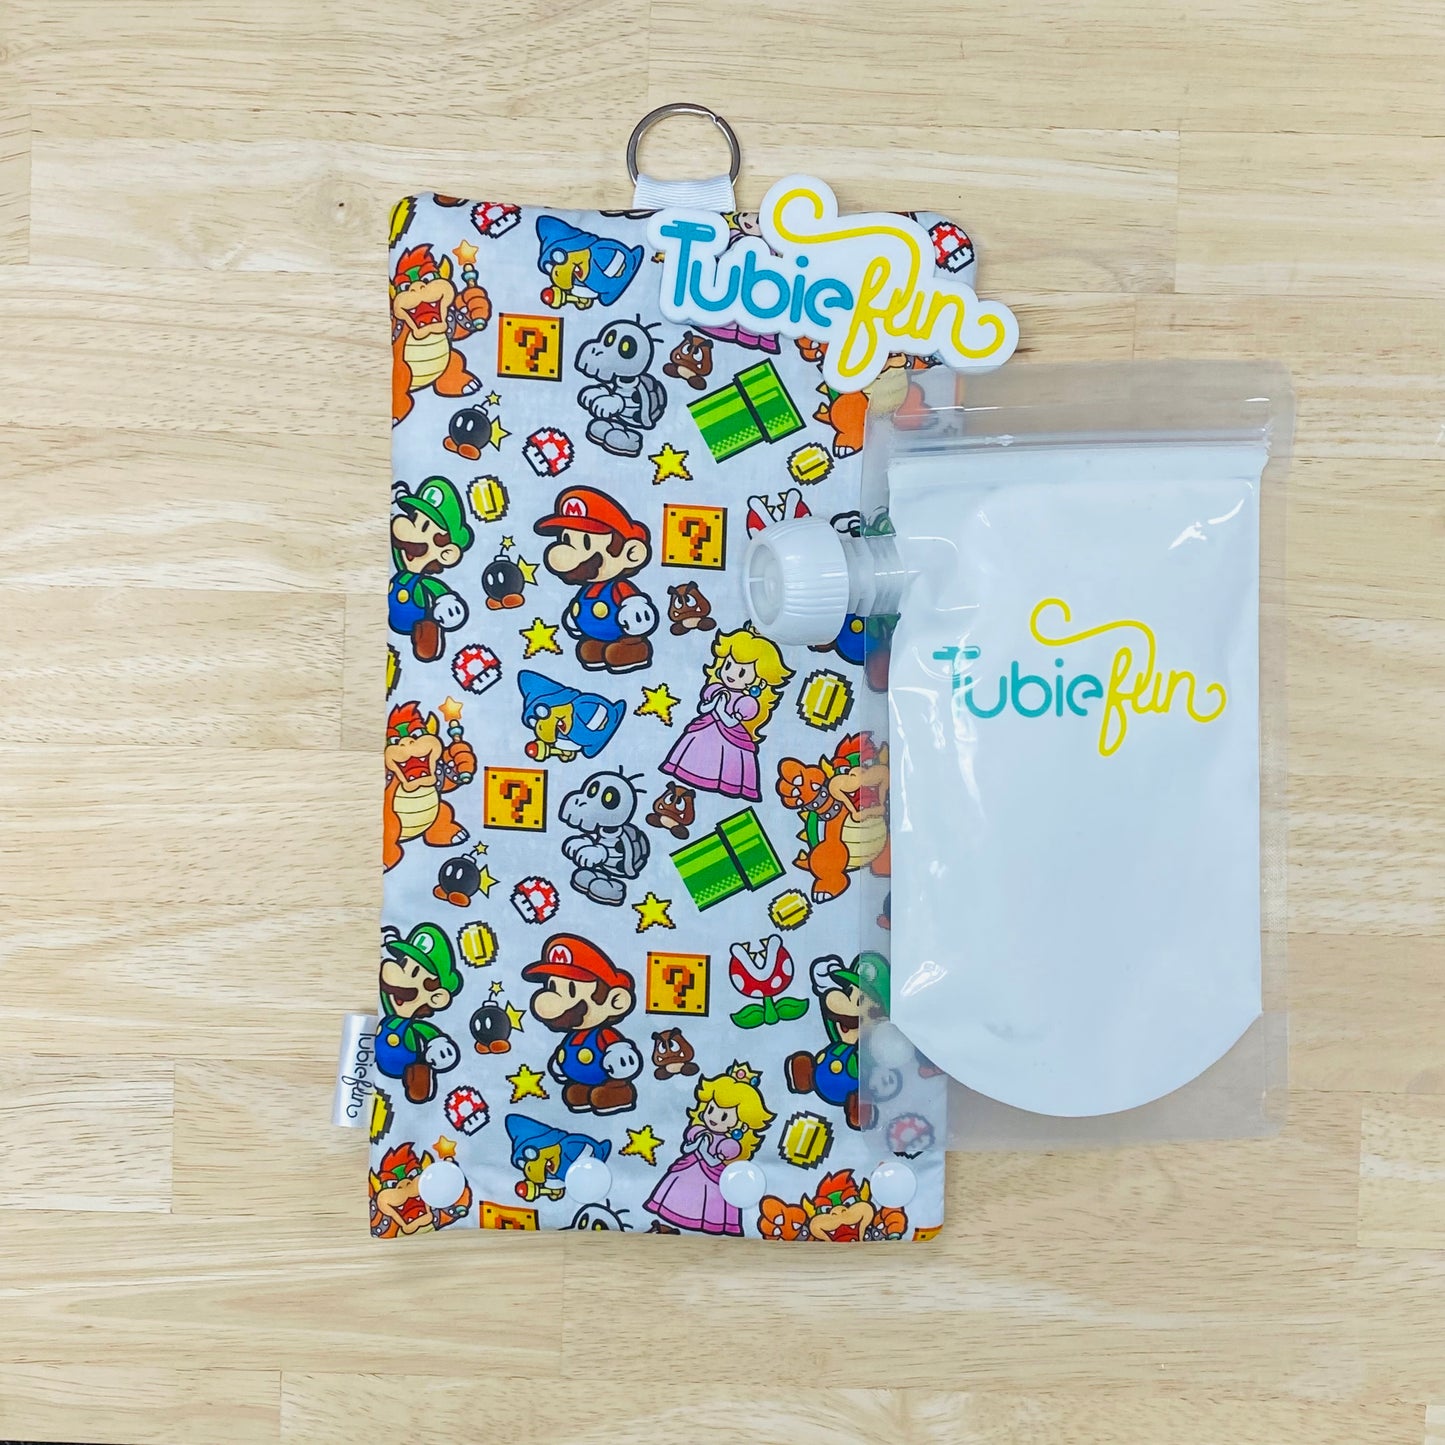 Insulated Milk Bag Suitable for Tubie Fun 500ml Reusable Pouches - Gaming Friends